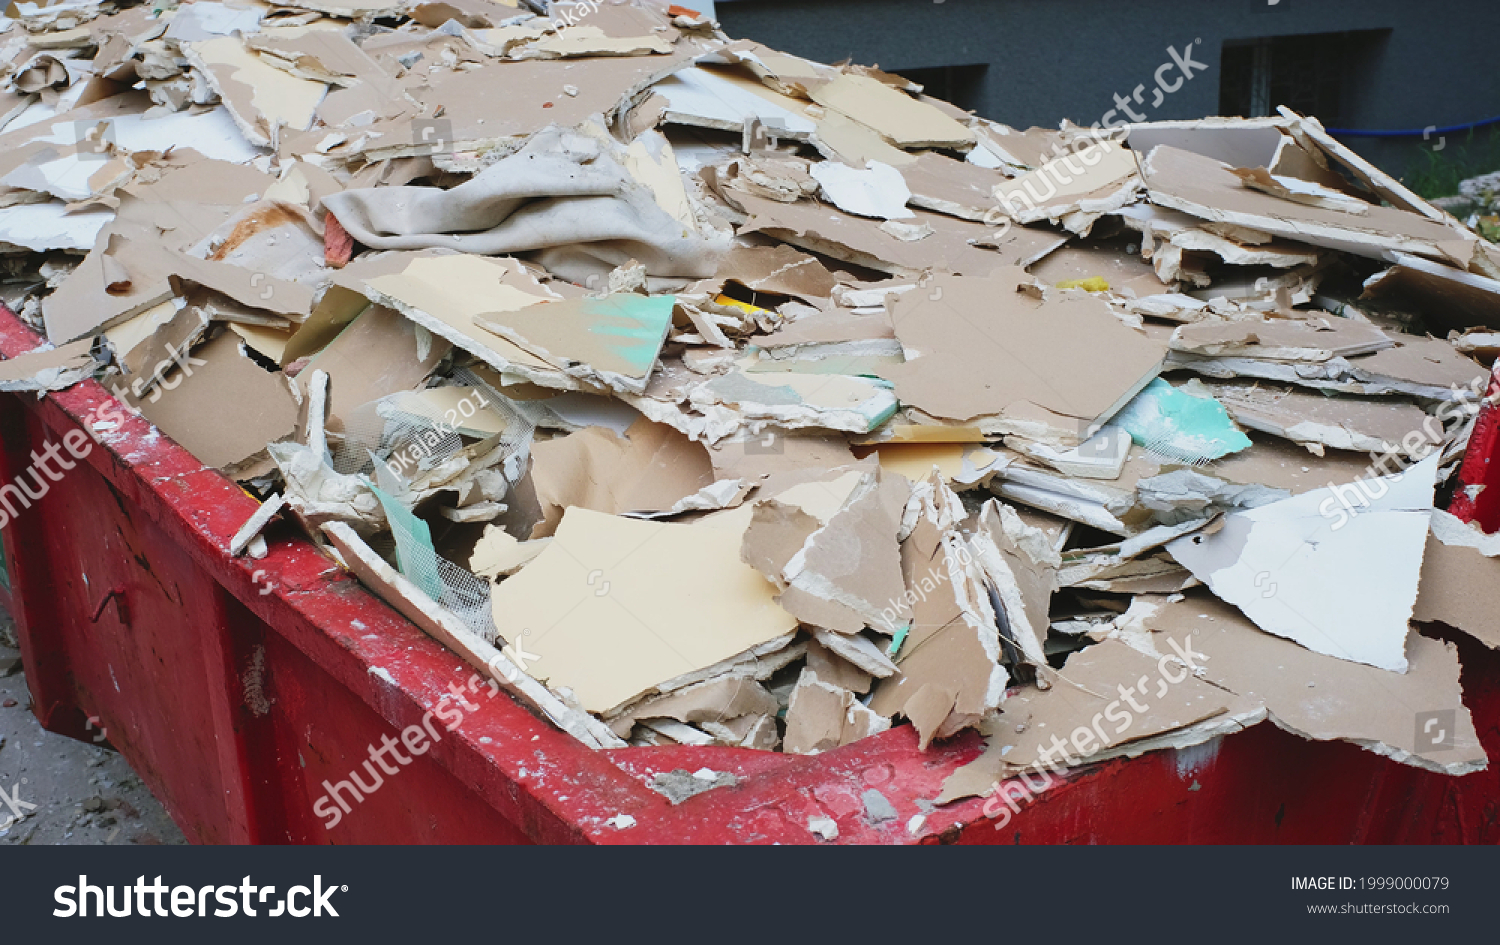 Pile of Hazardous Construction Materials Waste In Large Metal Garbage Dump Container Bin #1999000079